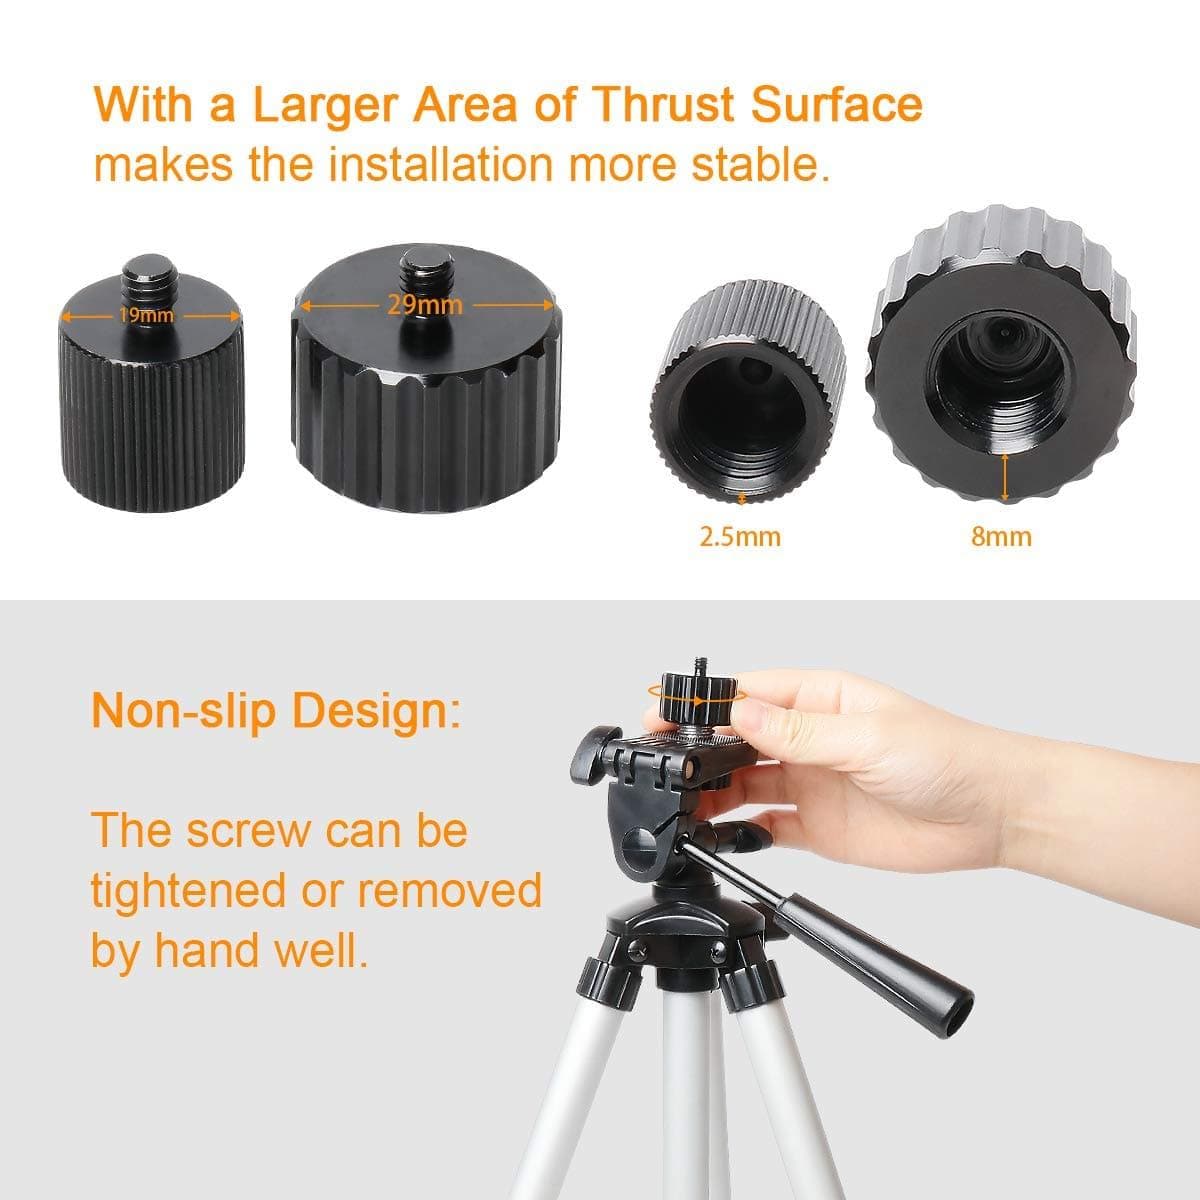 HUEPAR Adapter with 5/8-inch to 11 Female to 1/4-inch to 20 Male thread conversion for tripods and lasers, free shipping in the US0